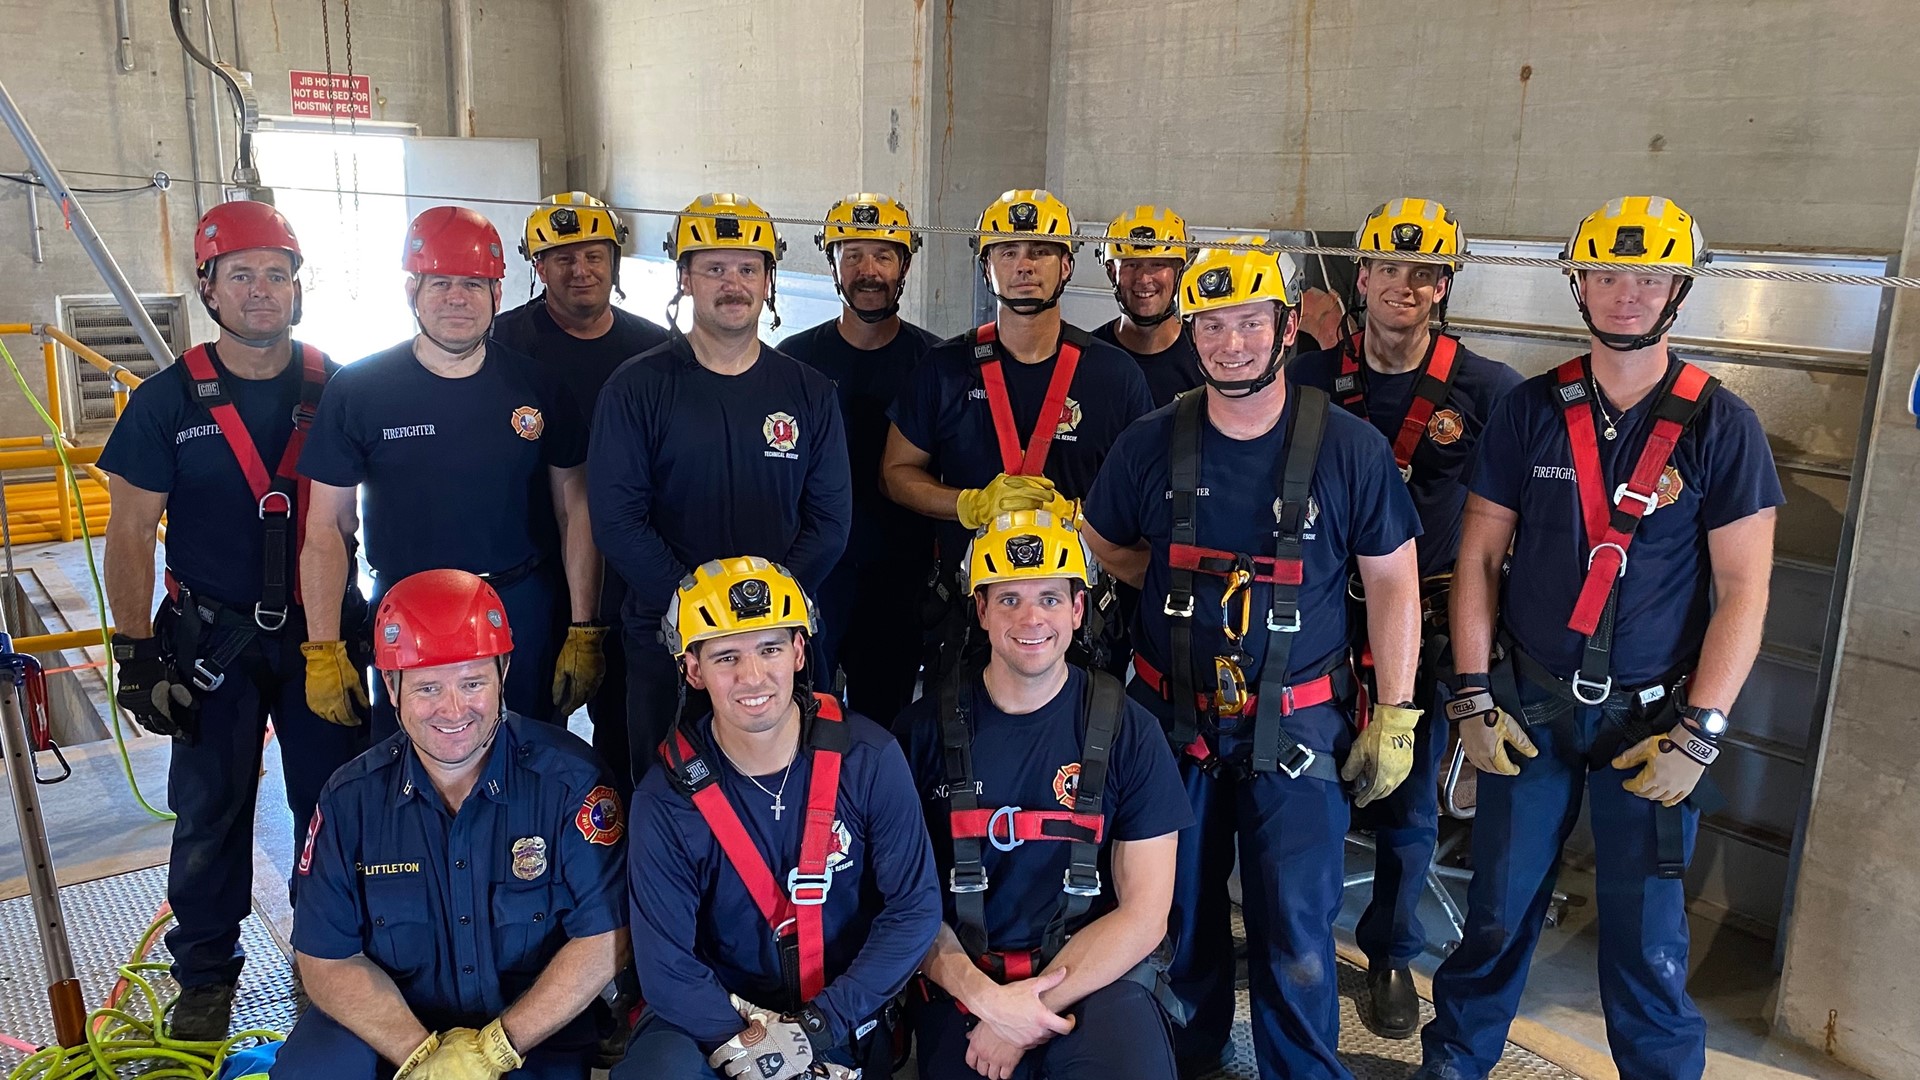 Did you know the Waco Fire Department has members with extra training and credentials to help in unique and unusual operations? Let us introduce the specialists.